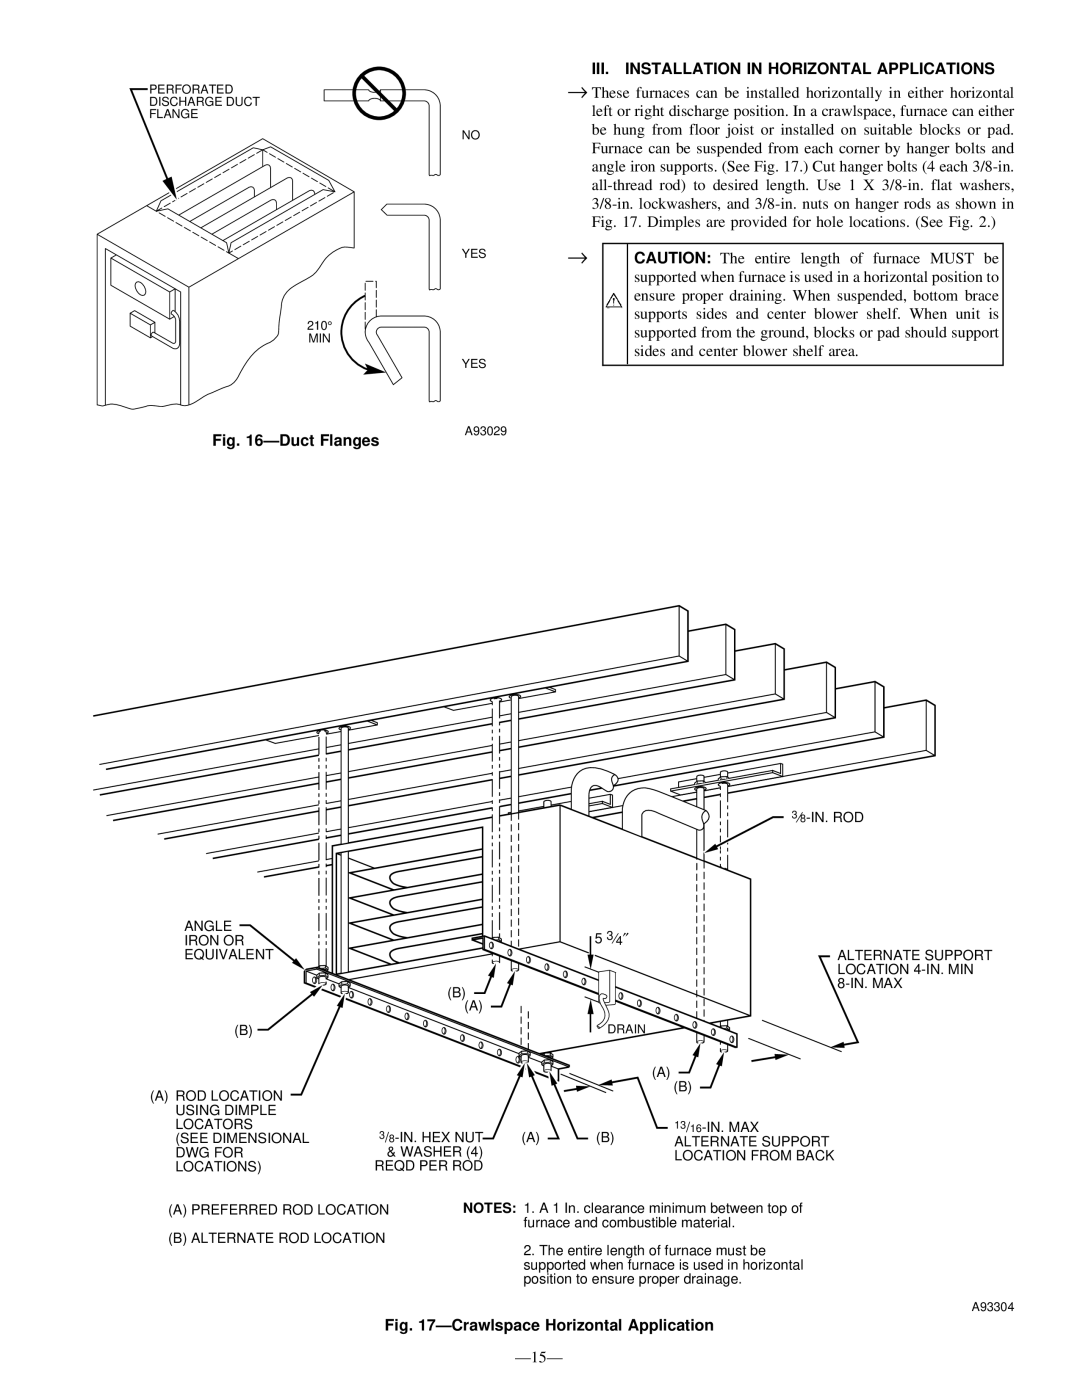 Bryant 340MAV instruction manual III. Installation in Horizontal Applications, ÐDuct Flanges 